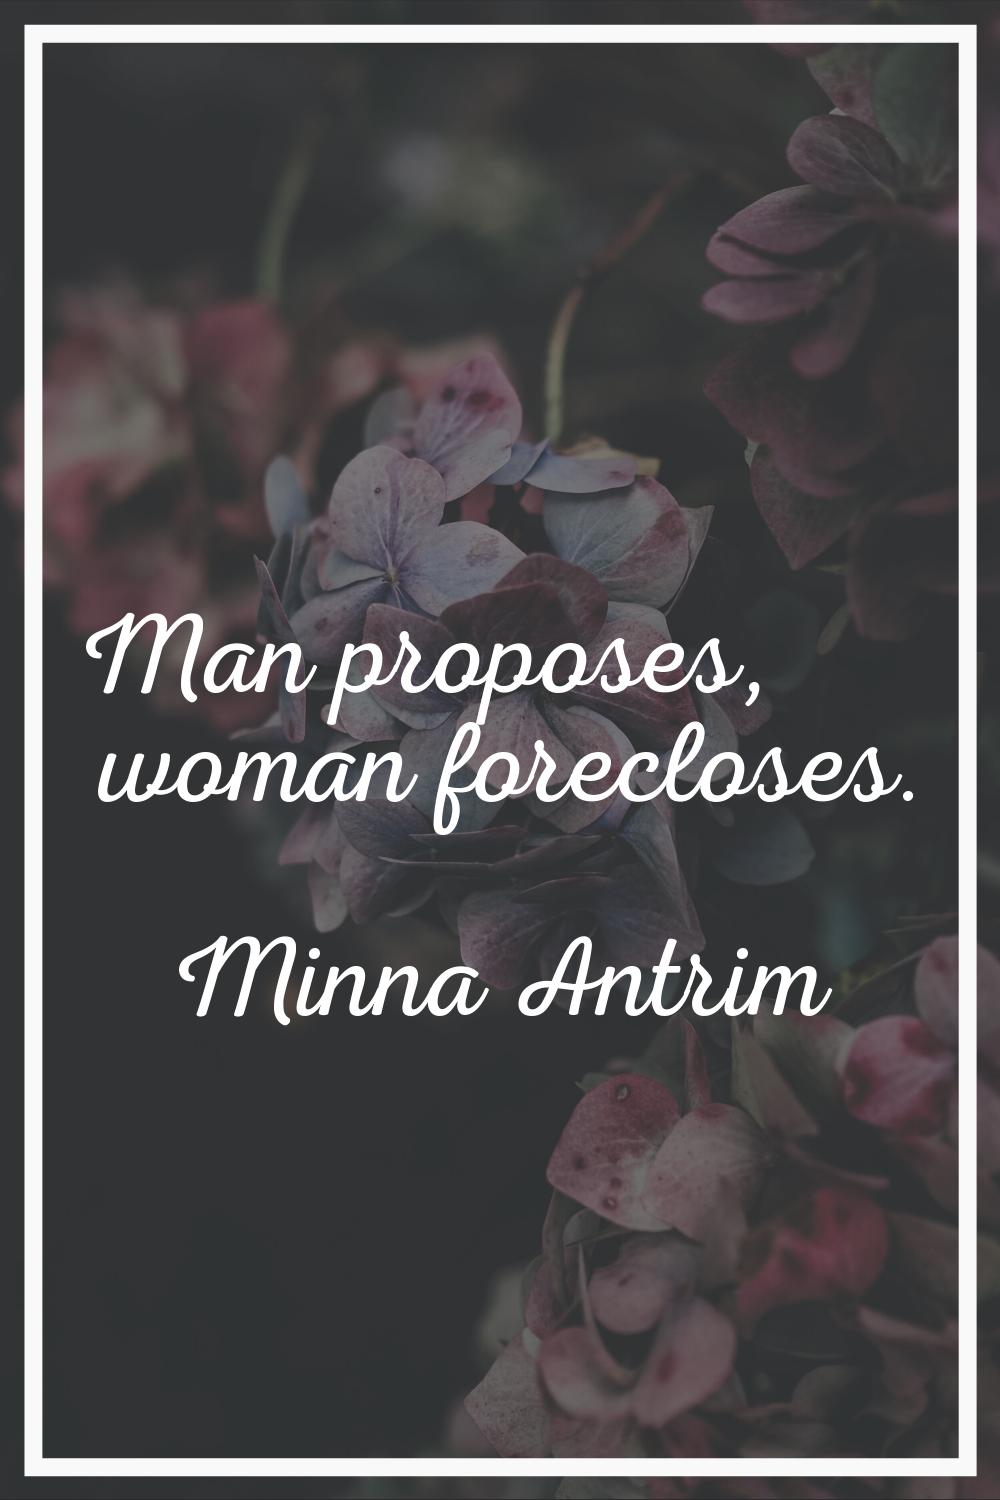 Man proposes, woman forecloses.